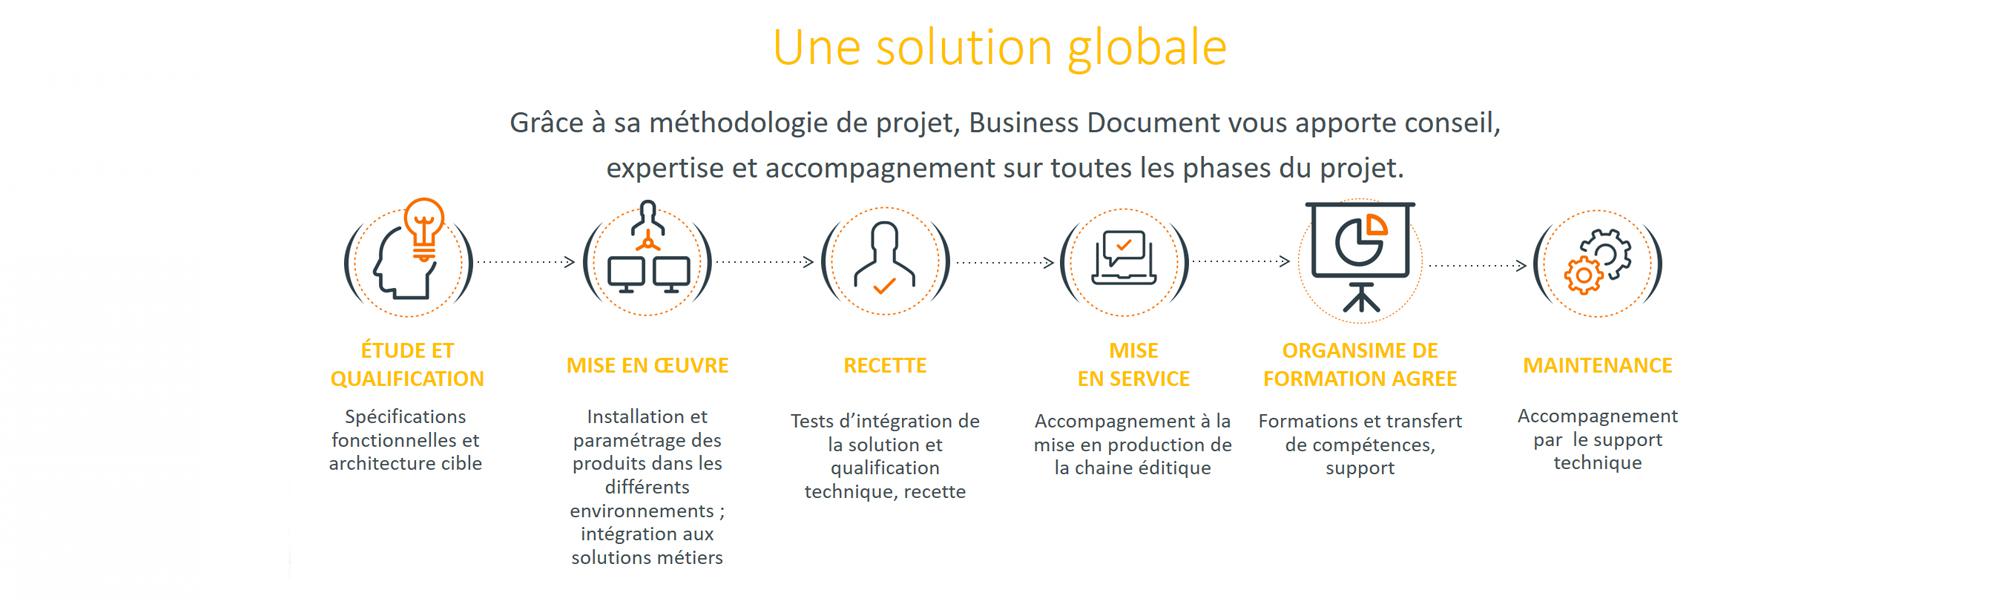 Une solution globale